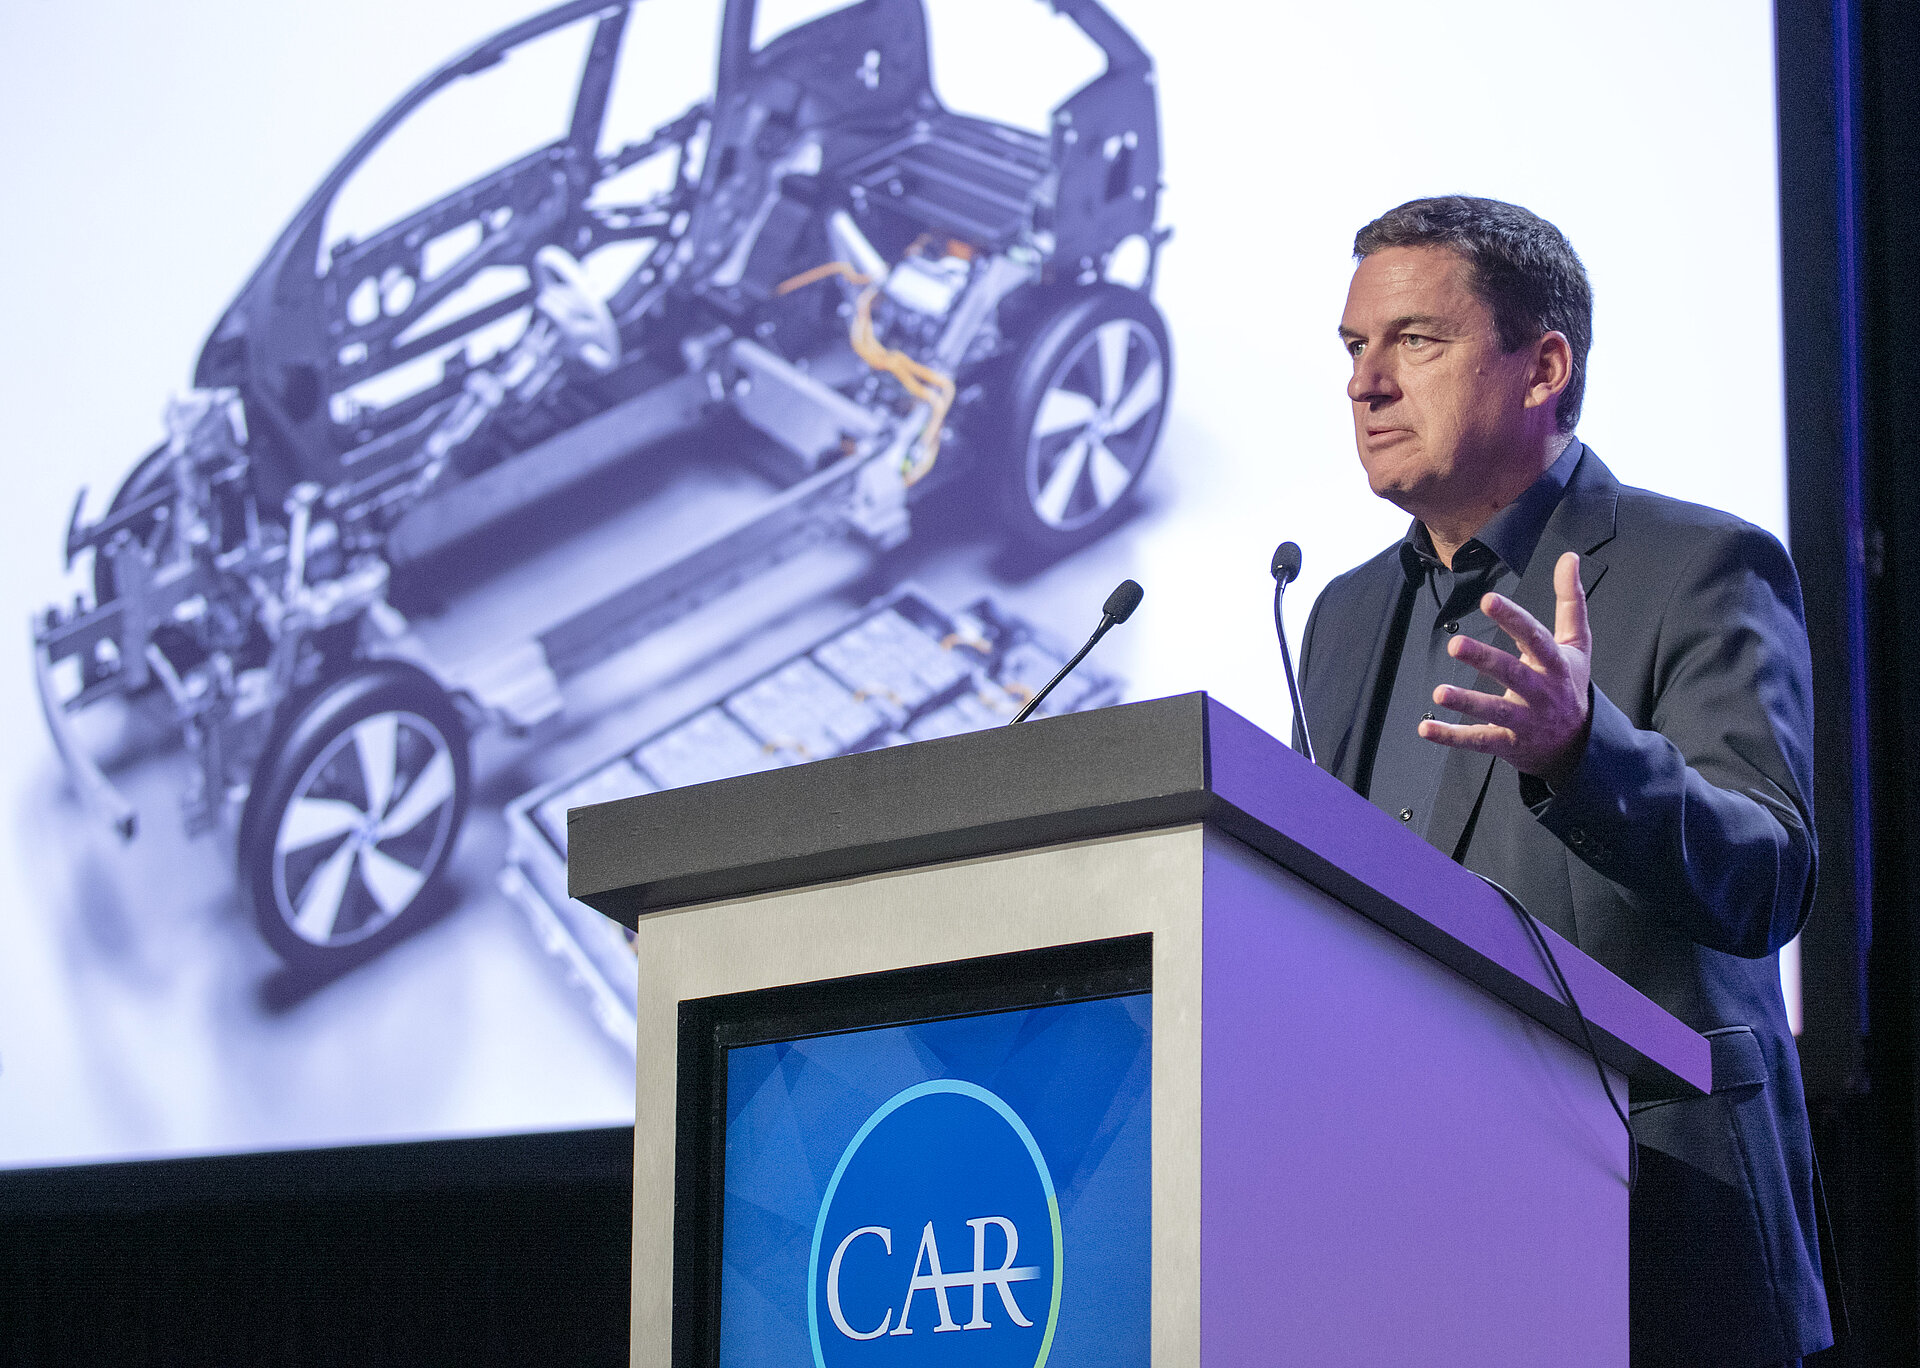 Center for Automotive Research Management Briefing Seminars